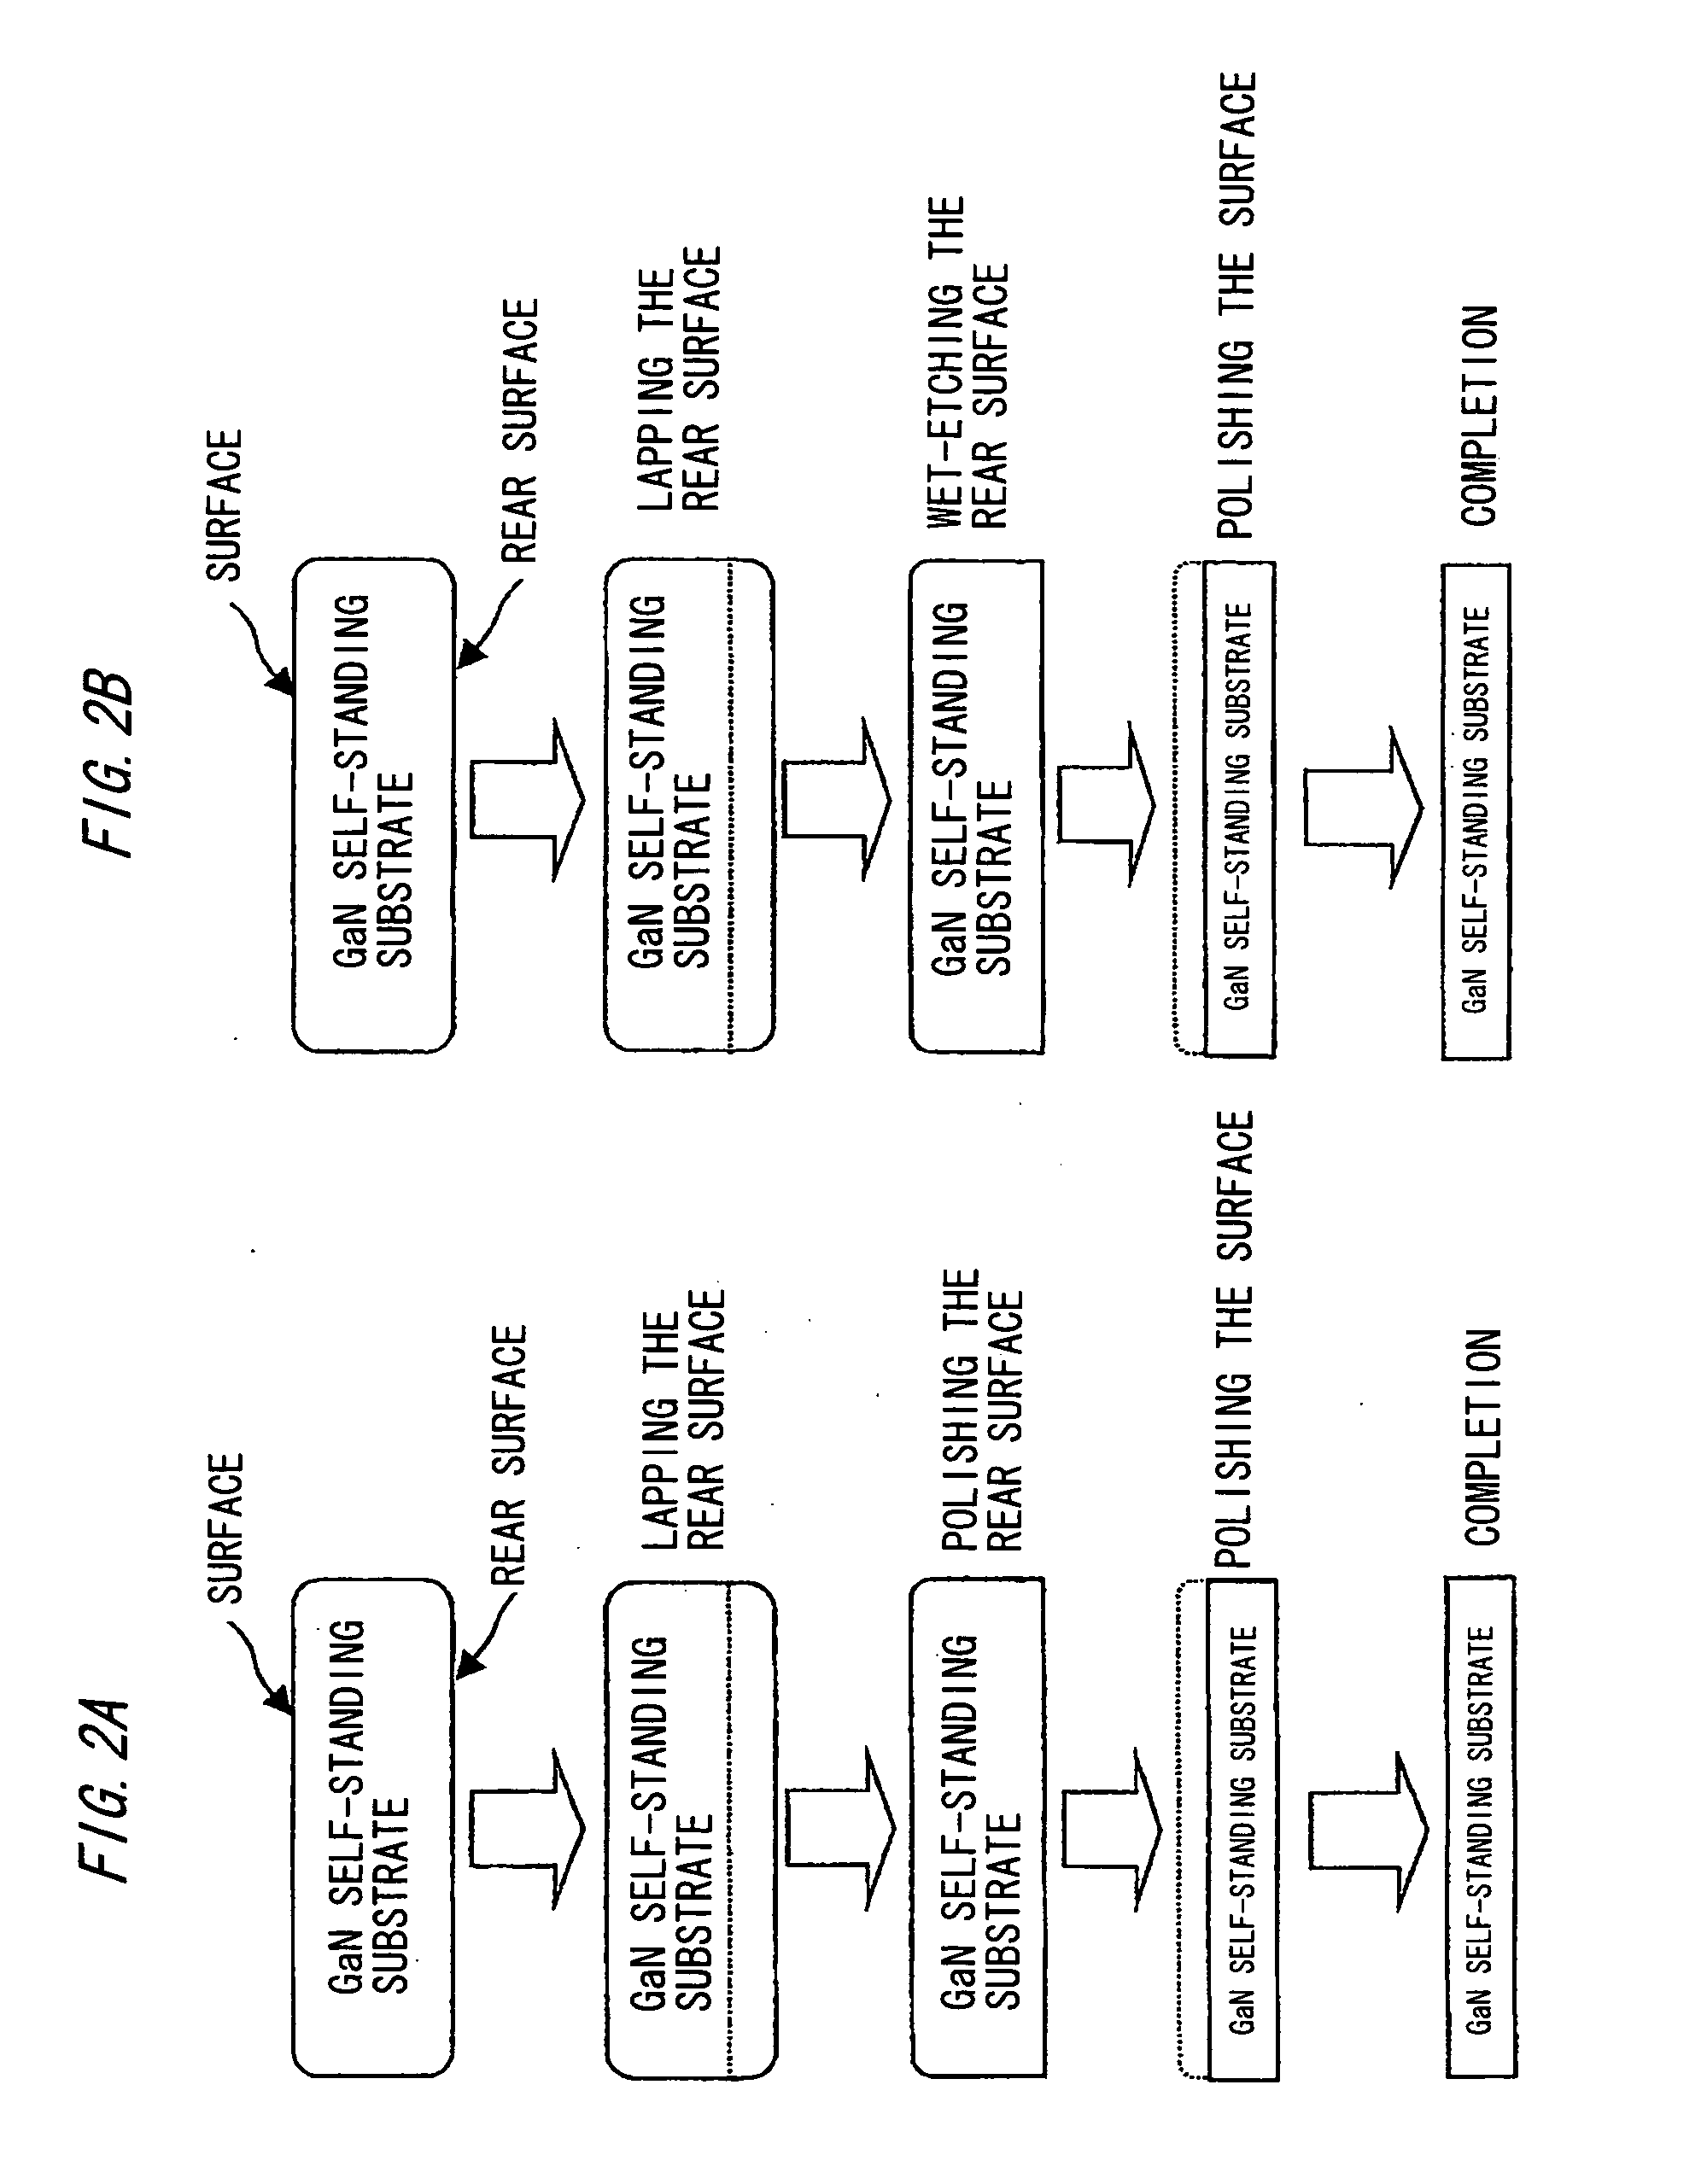 Self-standing GaN single crystal substrate, method of making same, and method of making a nitride semiconductor device